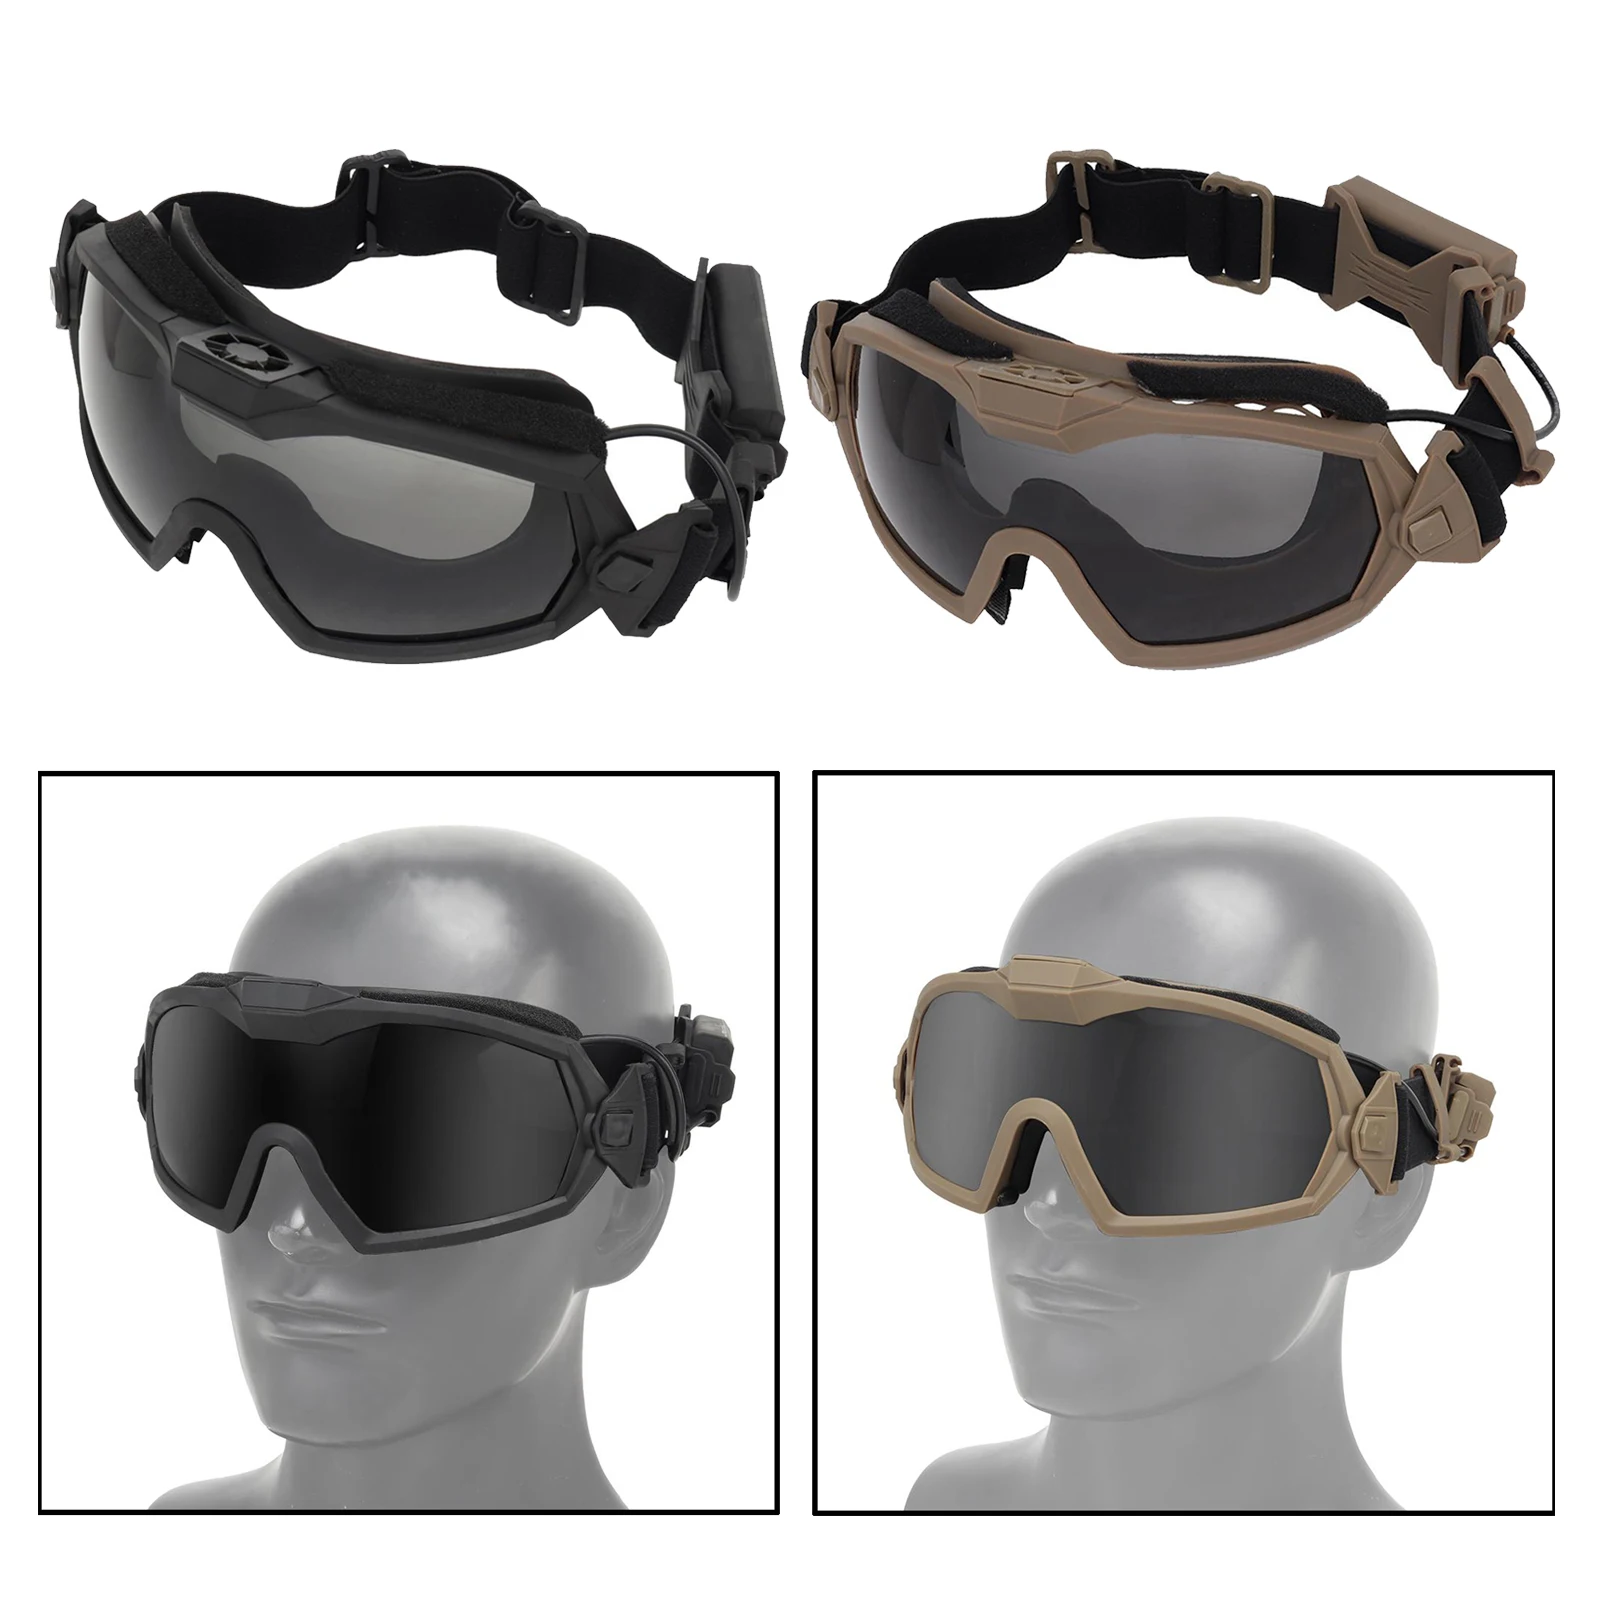 Outdoor Sports Goggles with 2 Lens UV400 Impact Resistance Shooting Goggles for